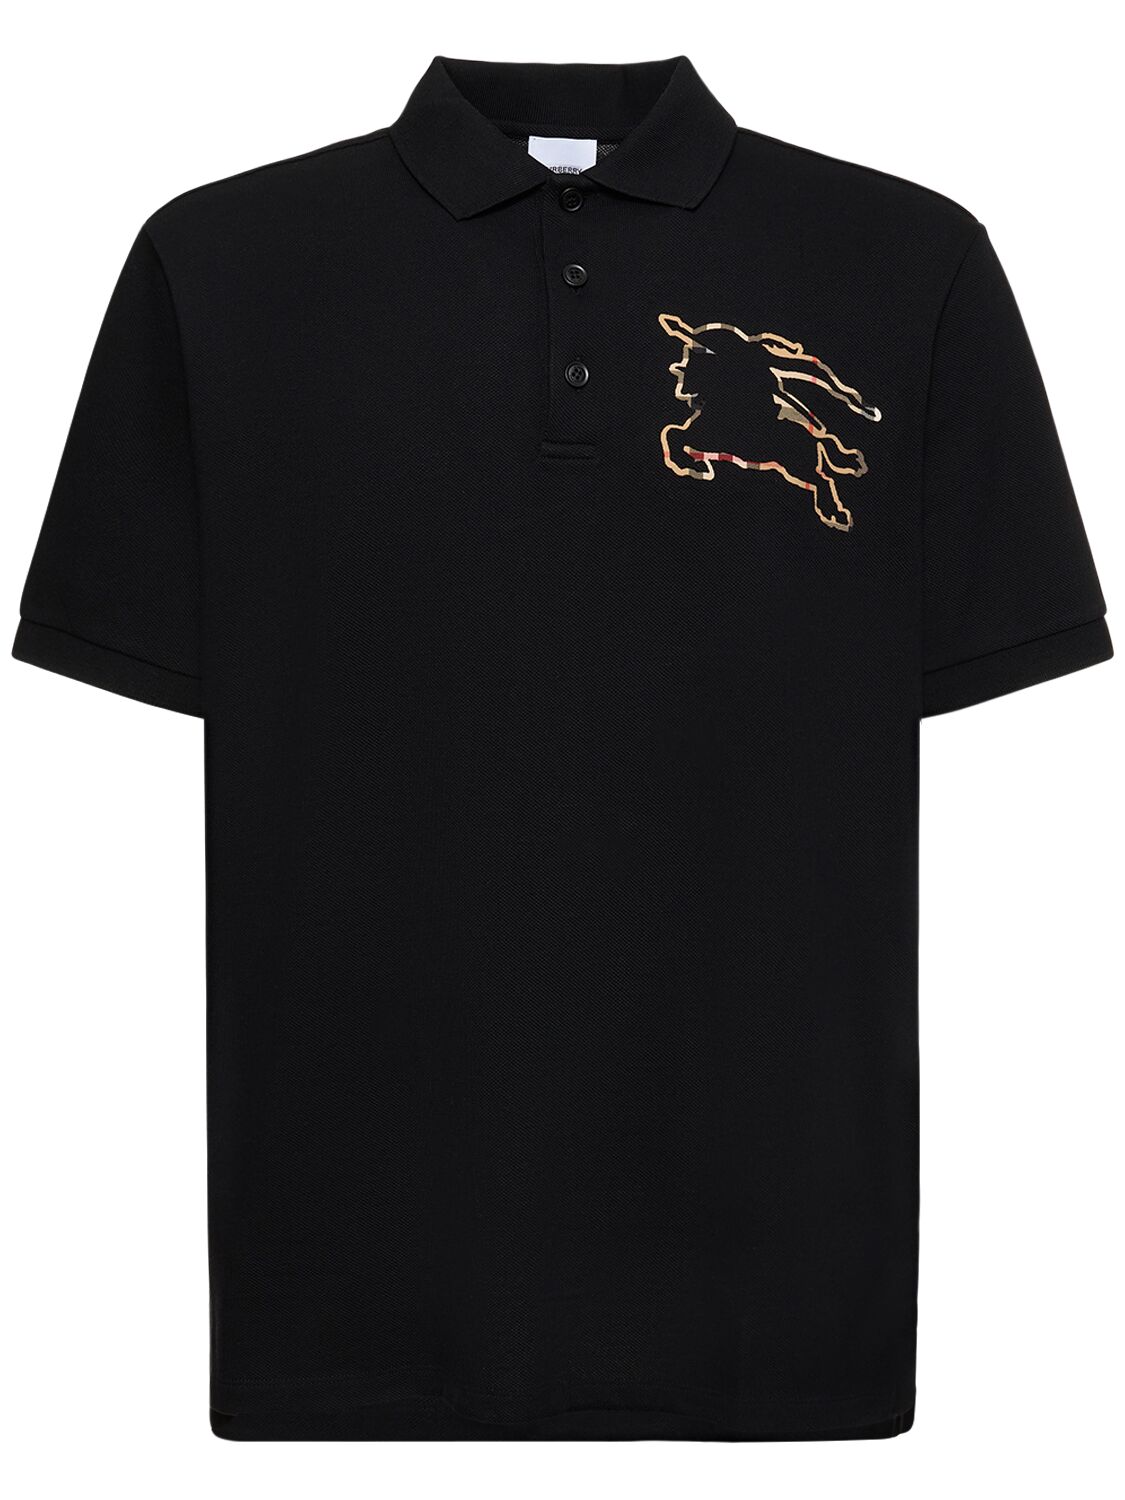 Winslow Printed Logo Core Fit Polo – MEN > CLOTHING > POLOS